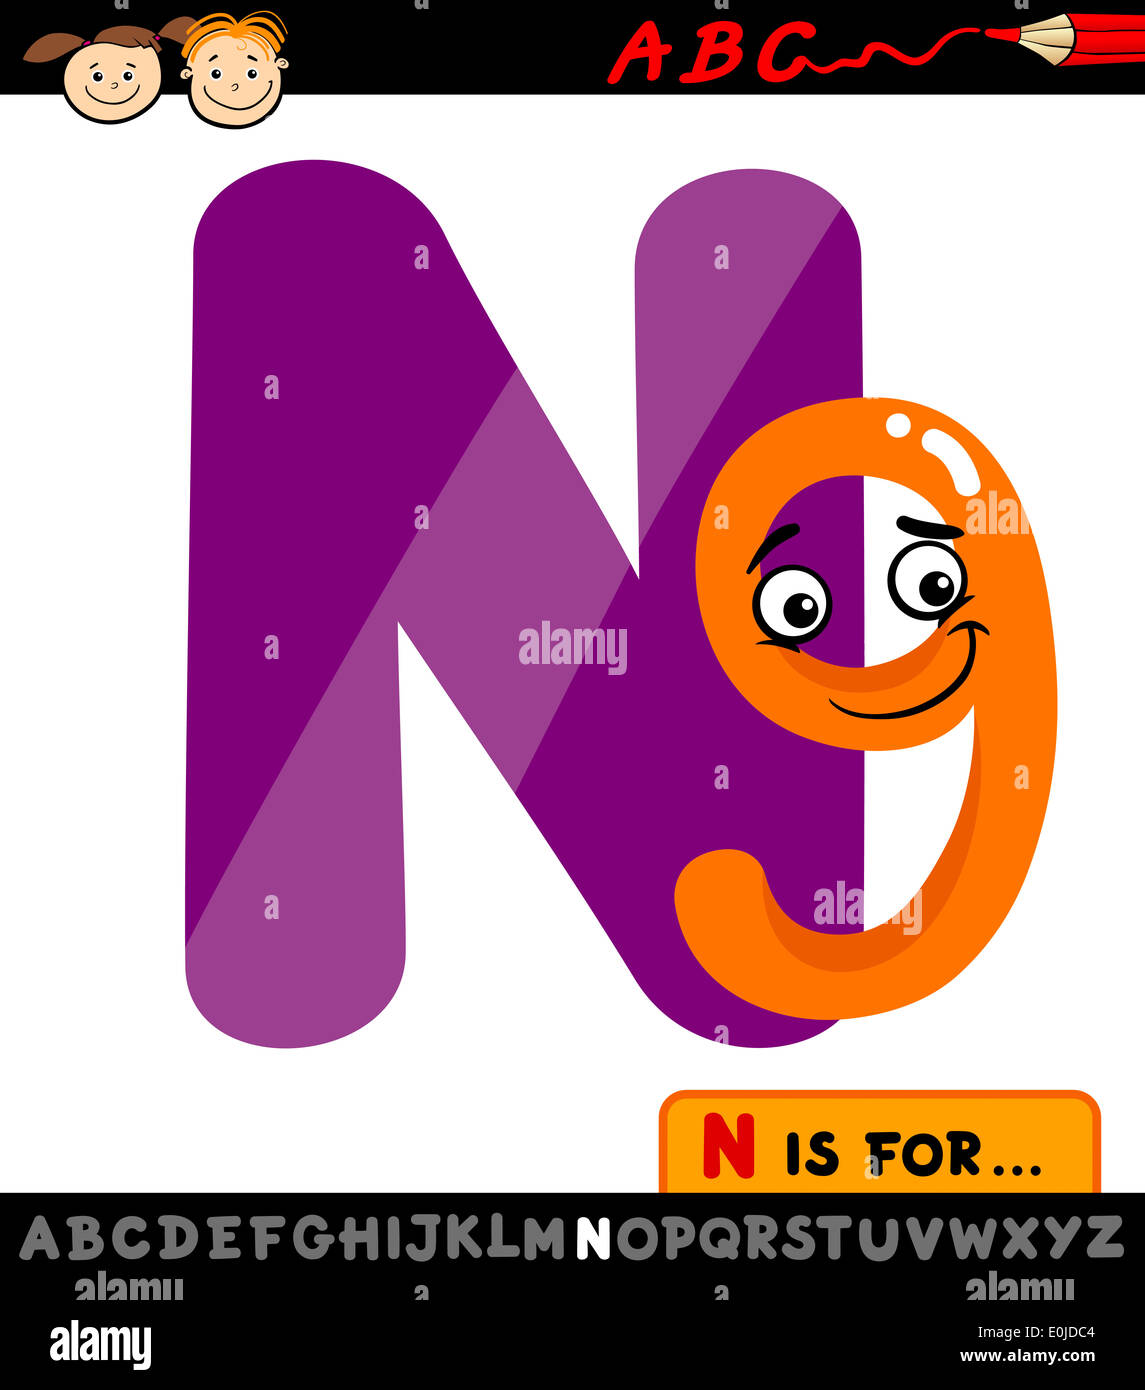 Cartoon Illustration of Capital Letter N from Alphabet with Nine for Children Education Stock Photo